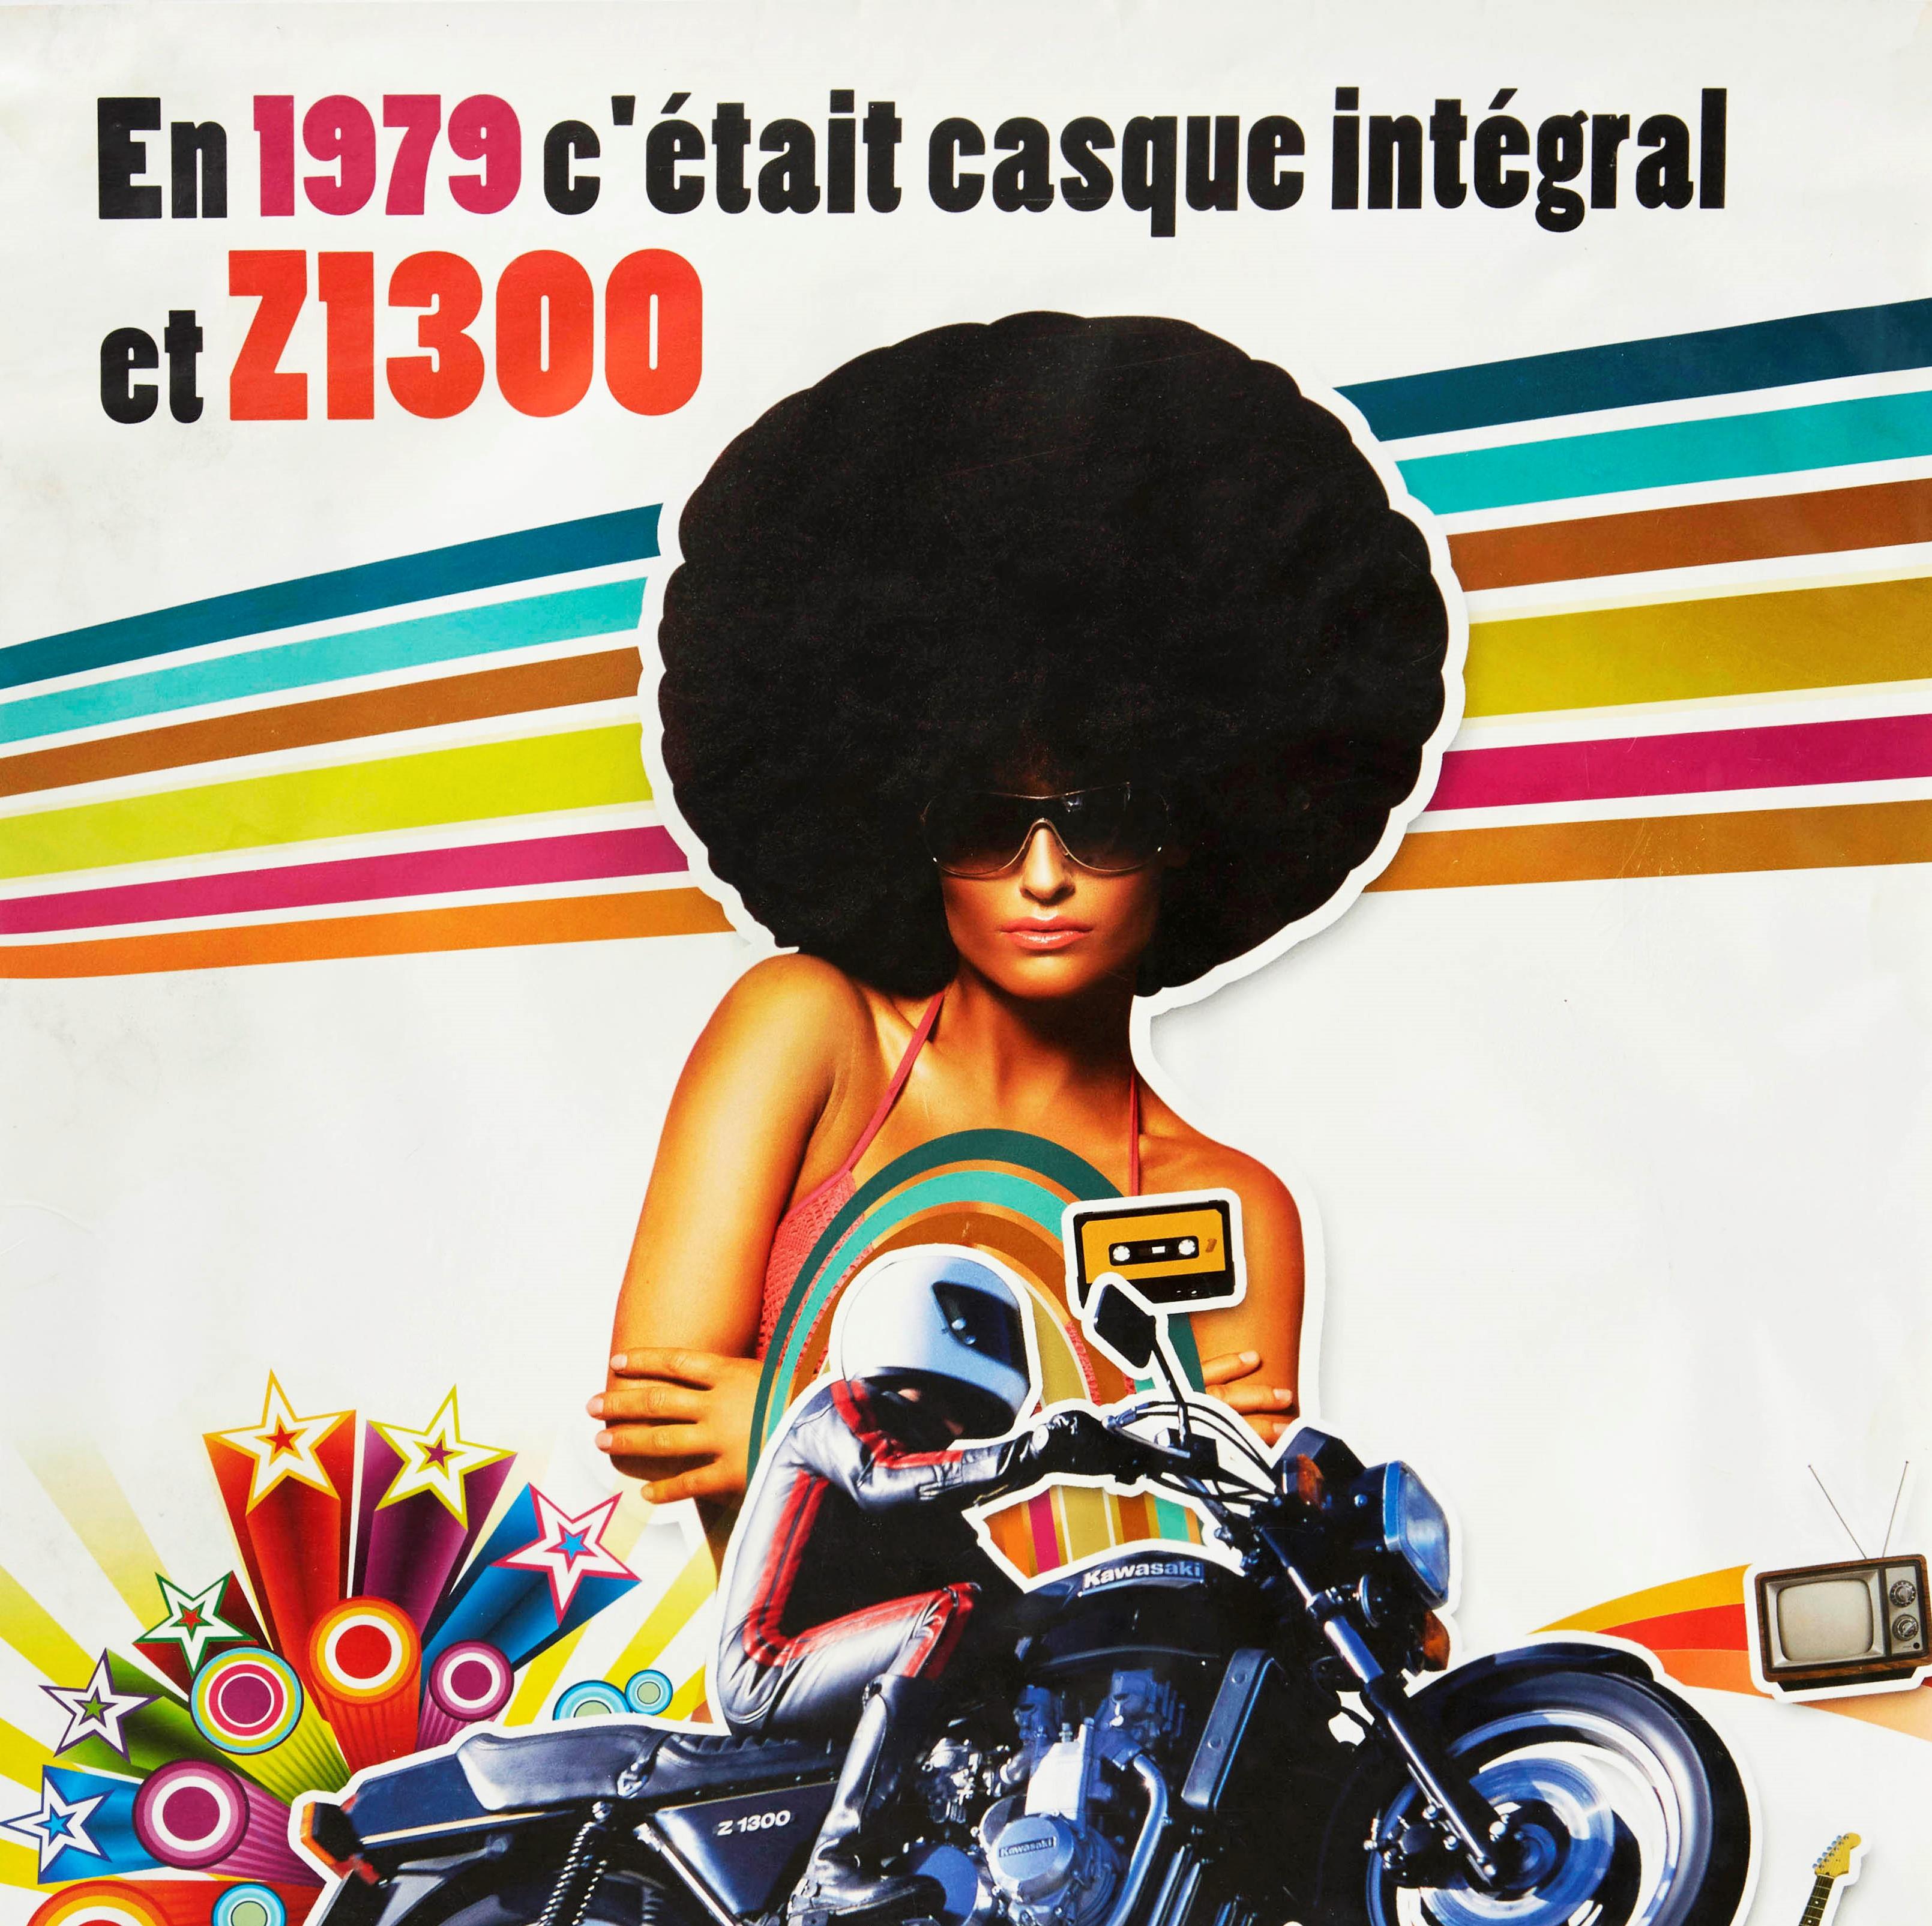 Original Vintage Poster Kawasaki Z1300 Sport Motorcycle Let The Good Times Roll - Print by Unknown